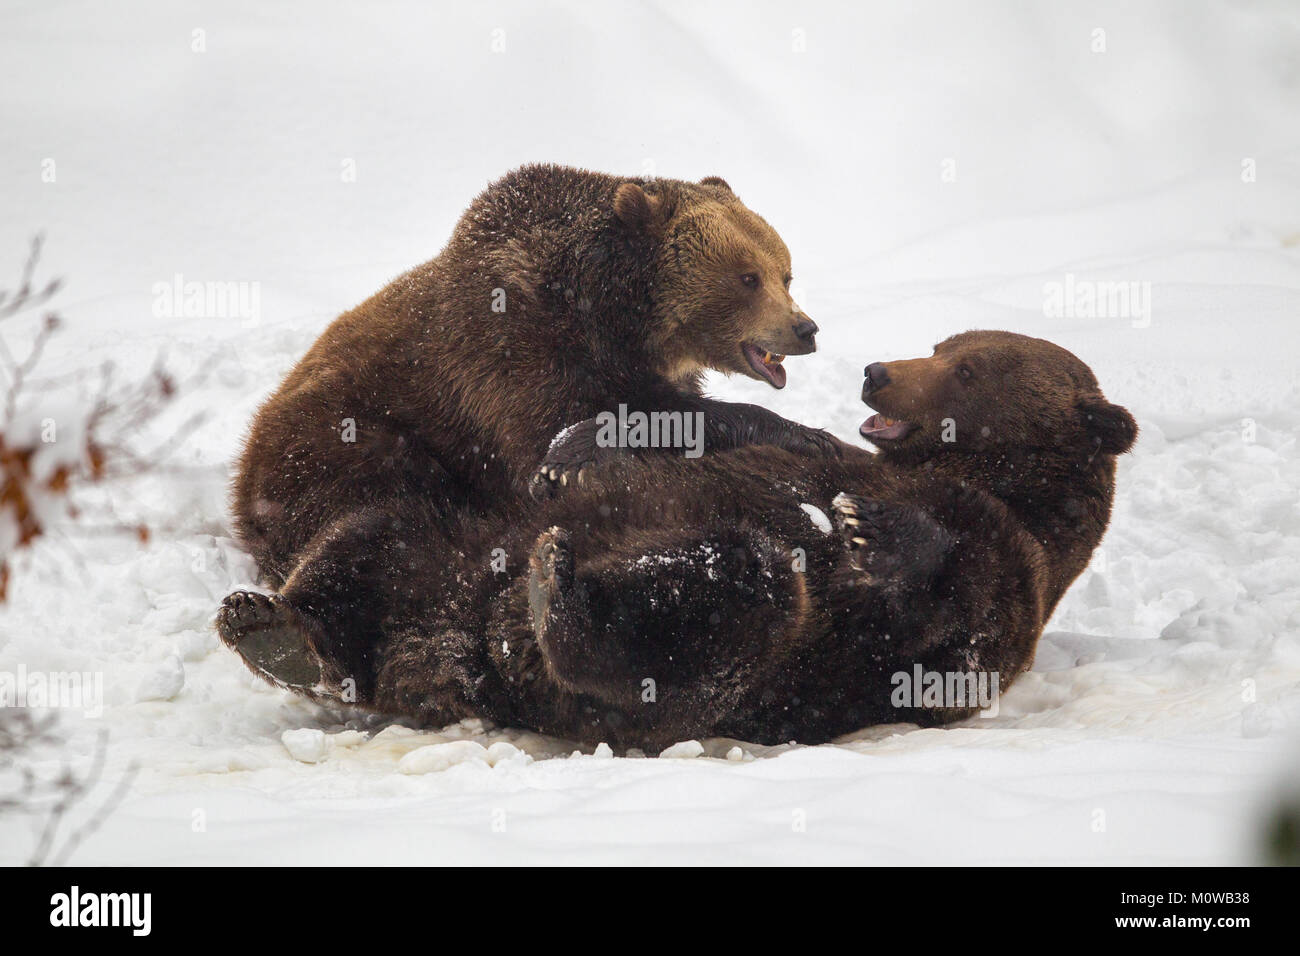 Brown bears (Ursus arctos) playing in the snow in the animal enclosure in the Bavarian Forest National Park, Bavaria, Germany. Stock Photo